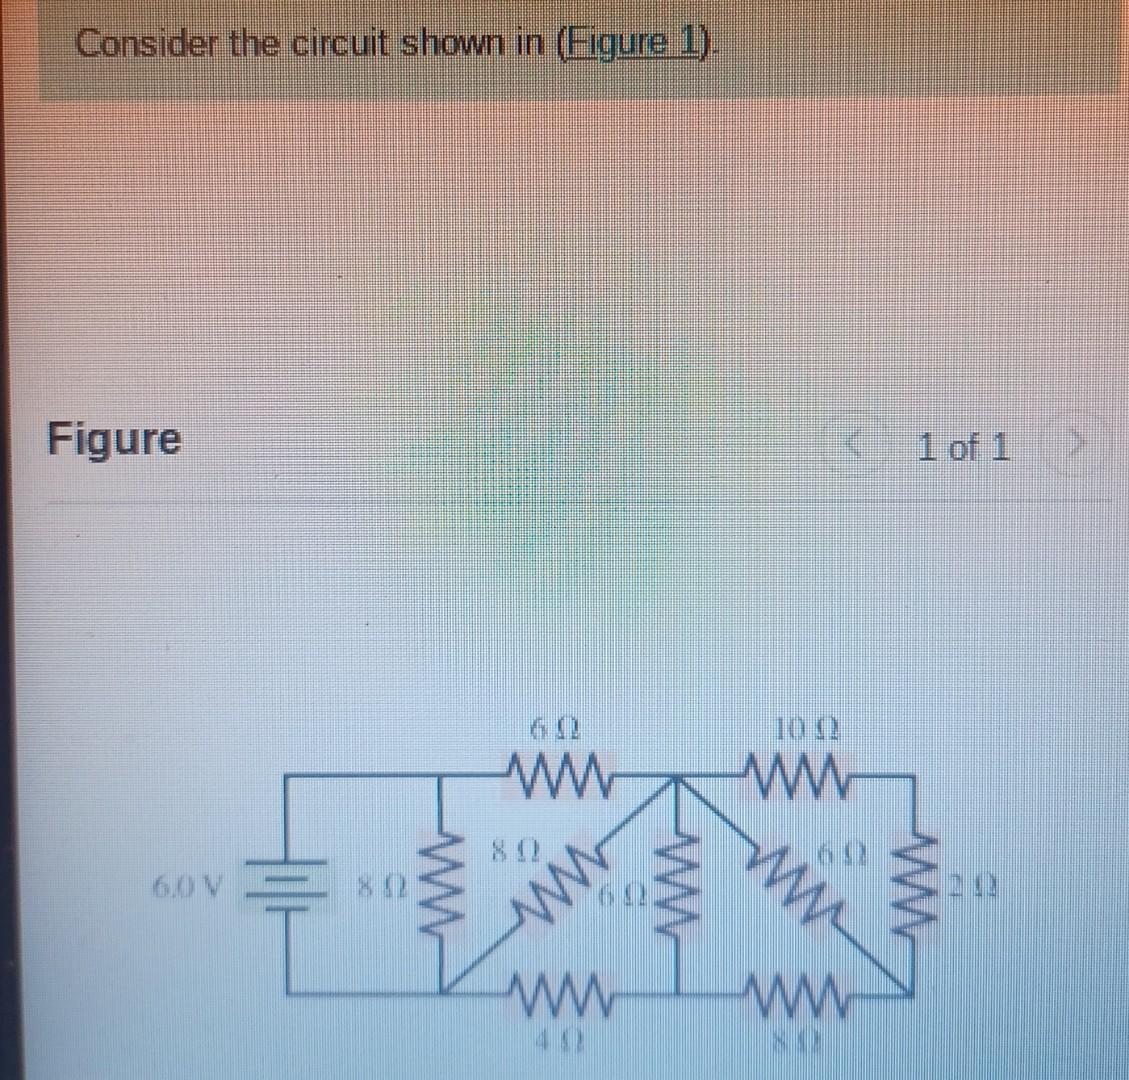 Consider the circuit shown in (Figure 1).
Figure
1 of 1